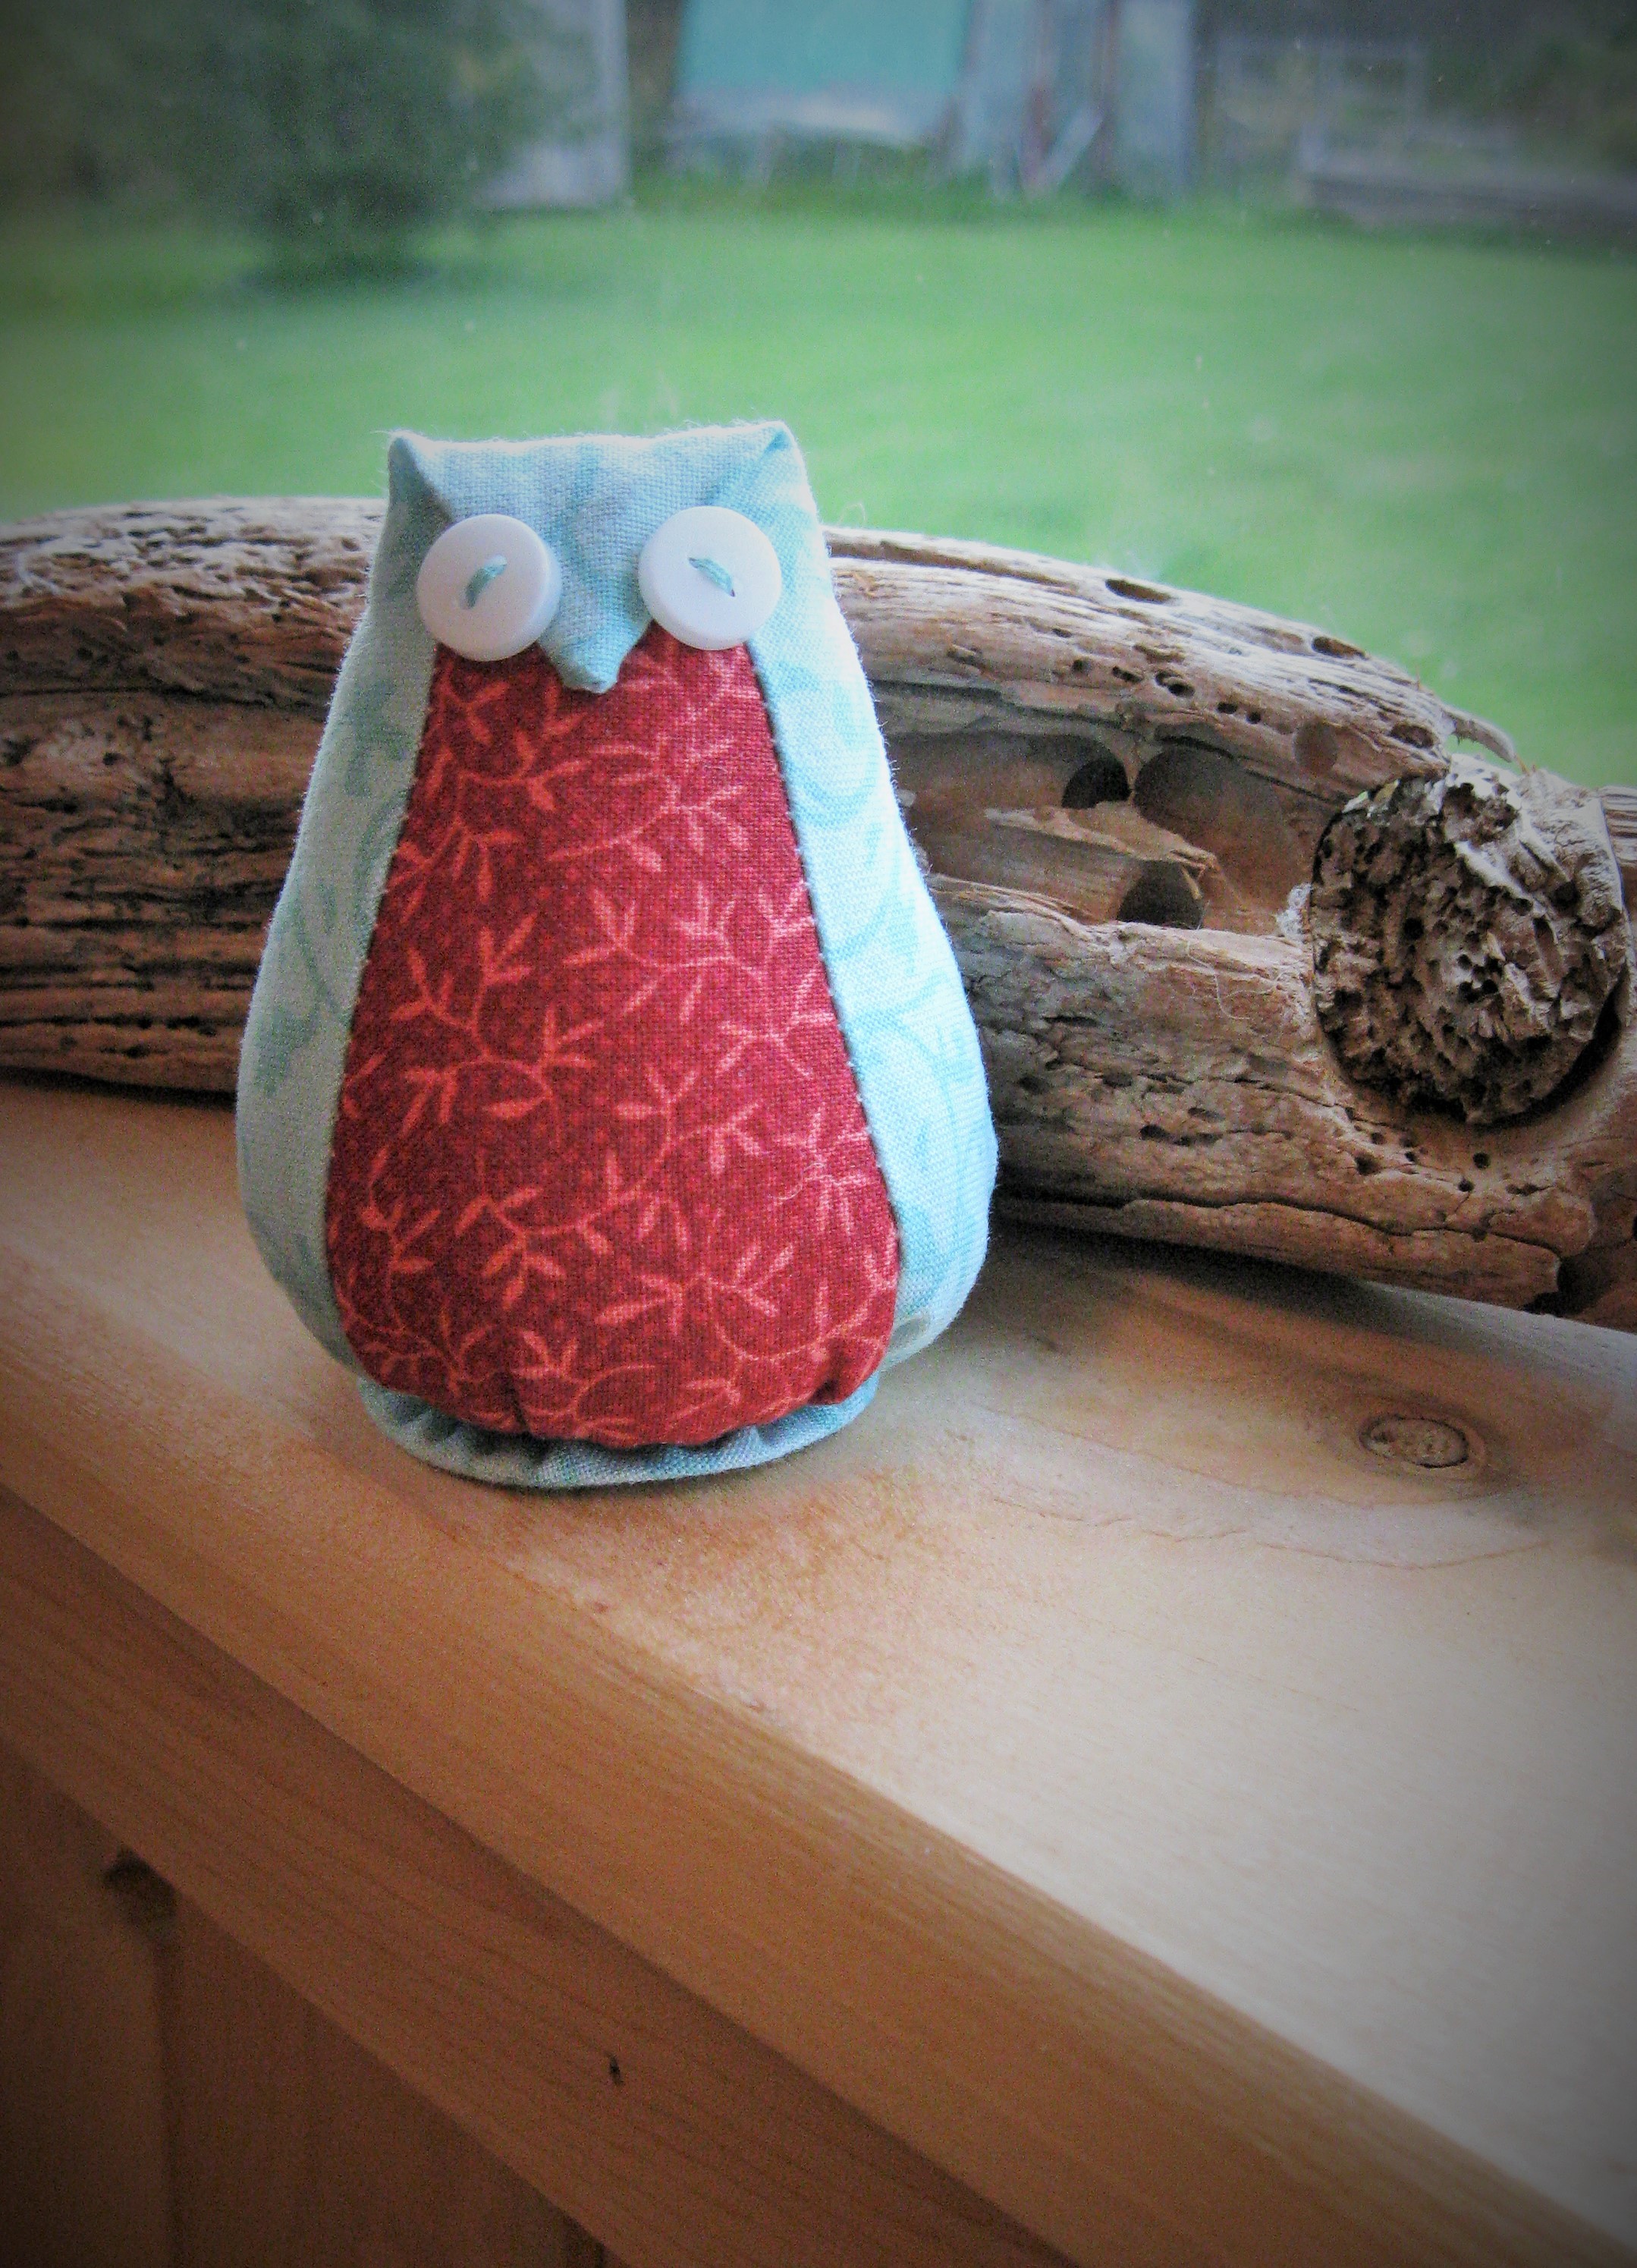 Little Owl Pincushion – Sewing Projects | BurdaStyle.com